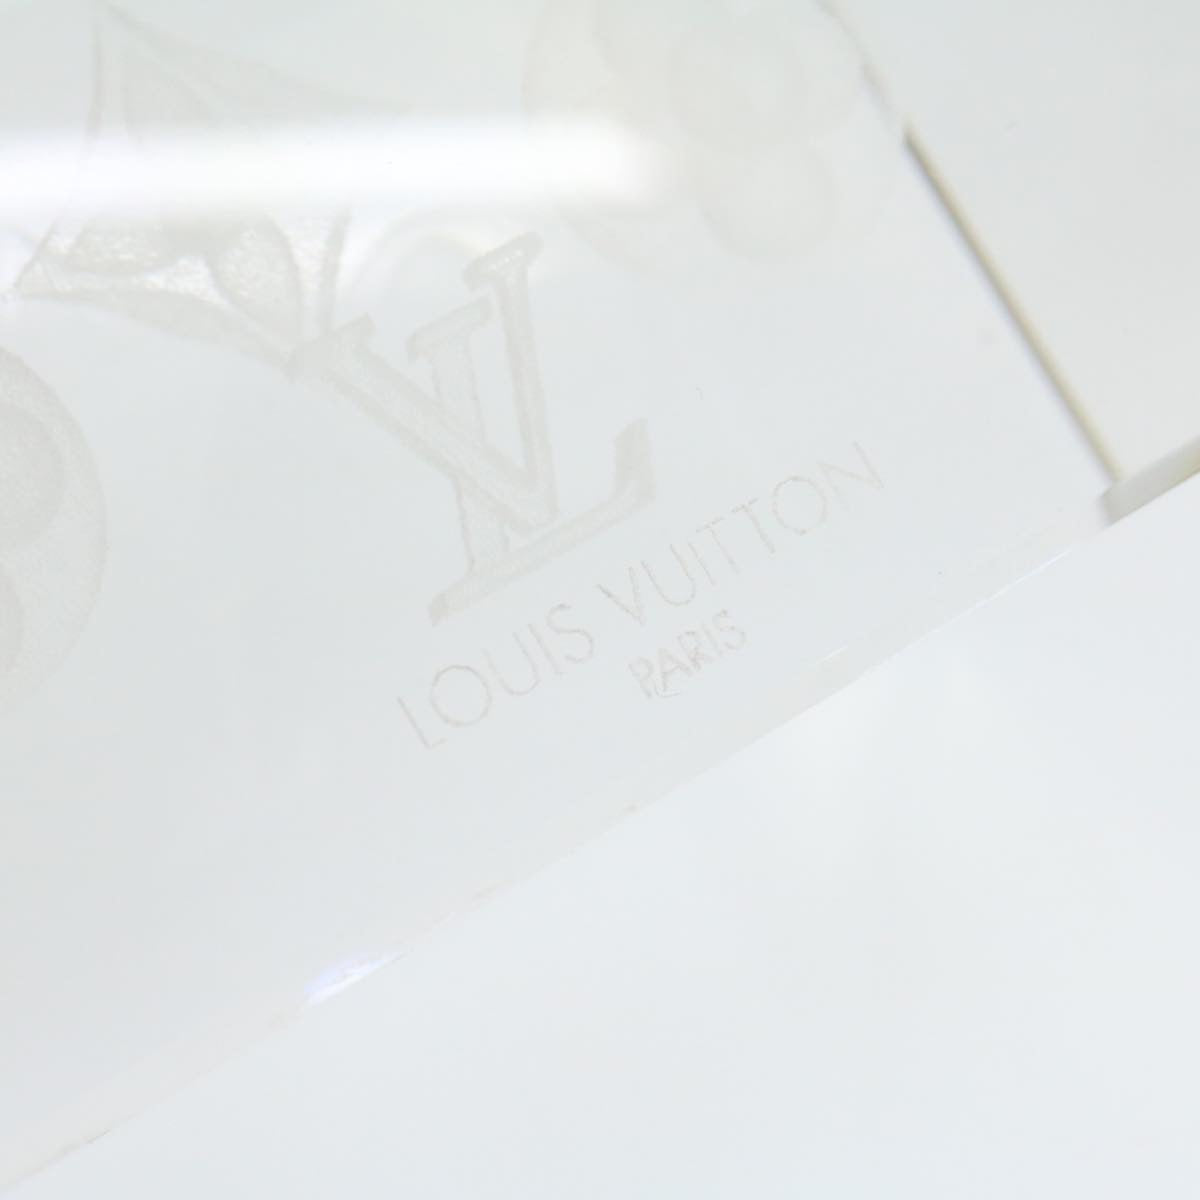 LOUIS VUITTON Paper Weight Crystal Glass Clear LV Auth 21193